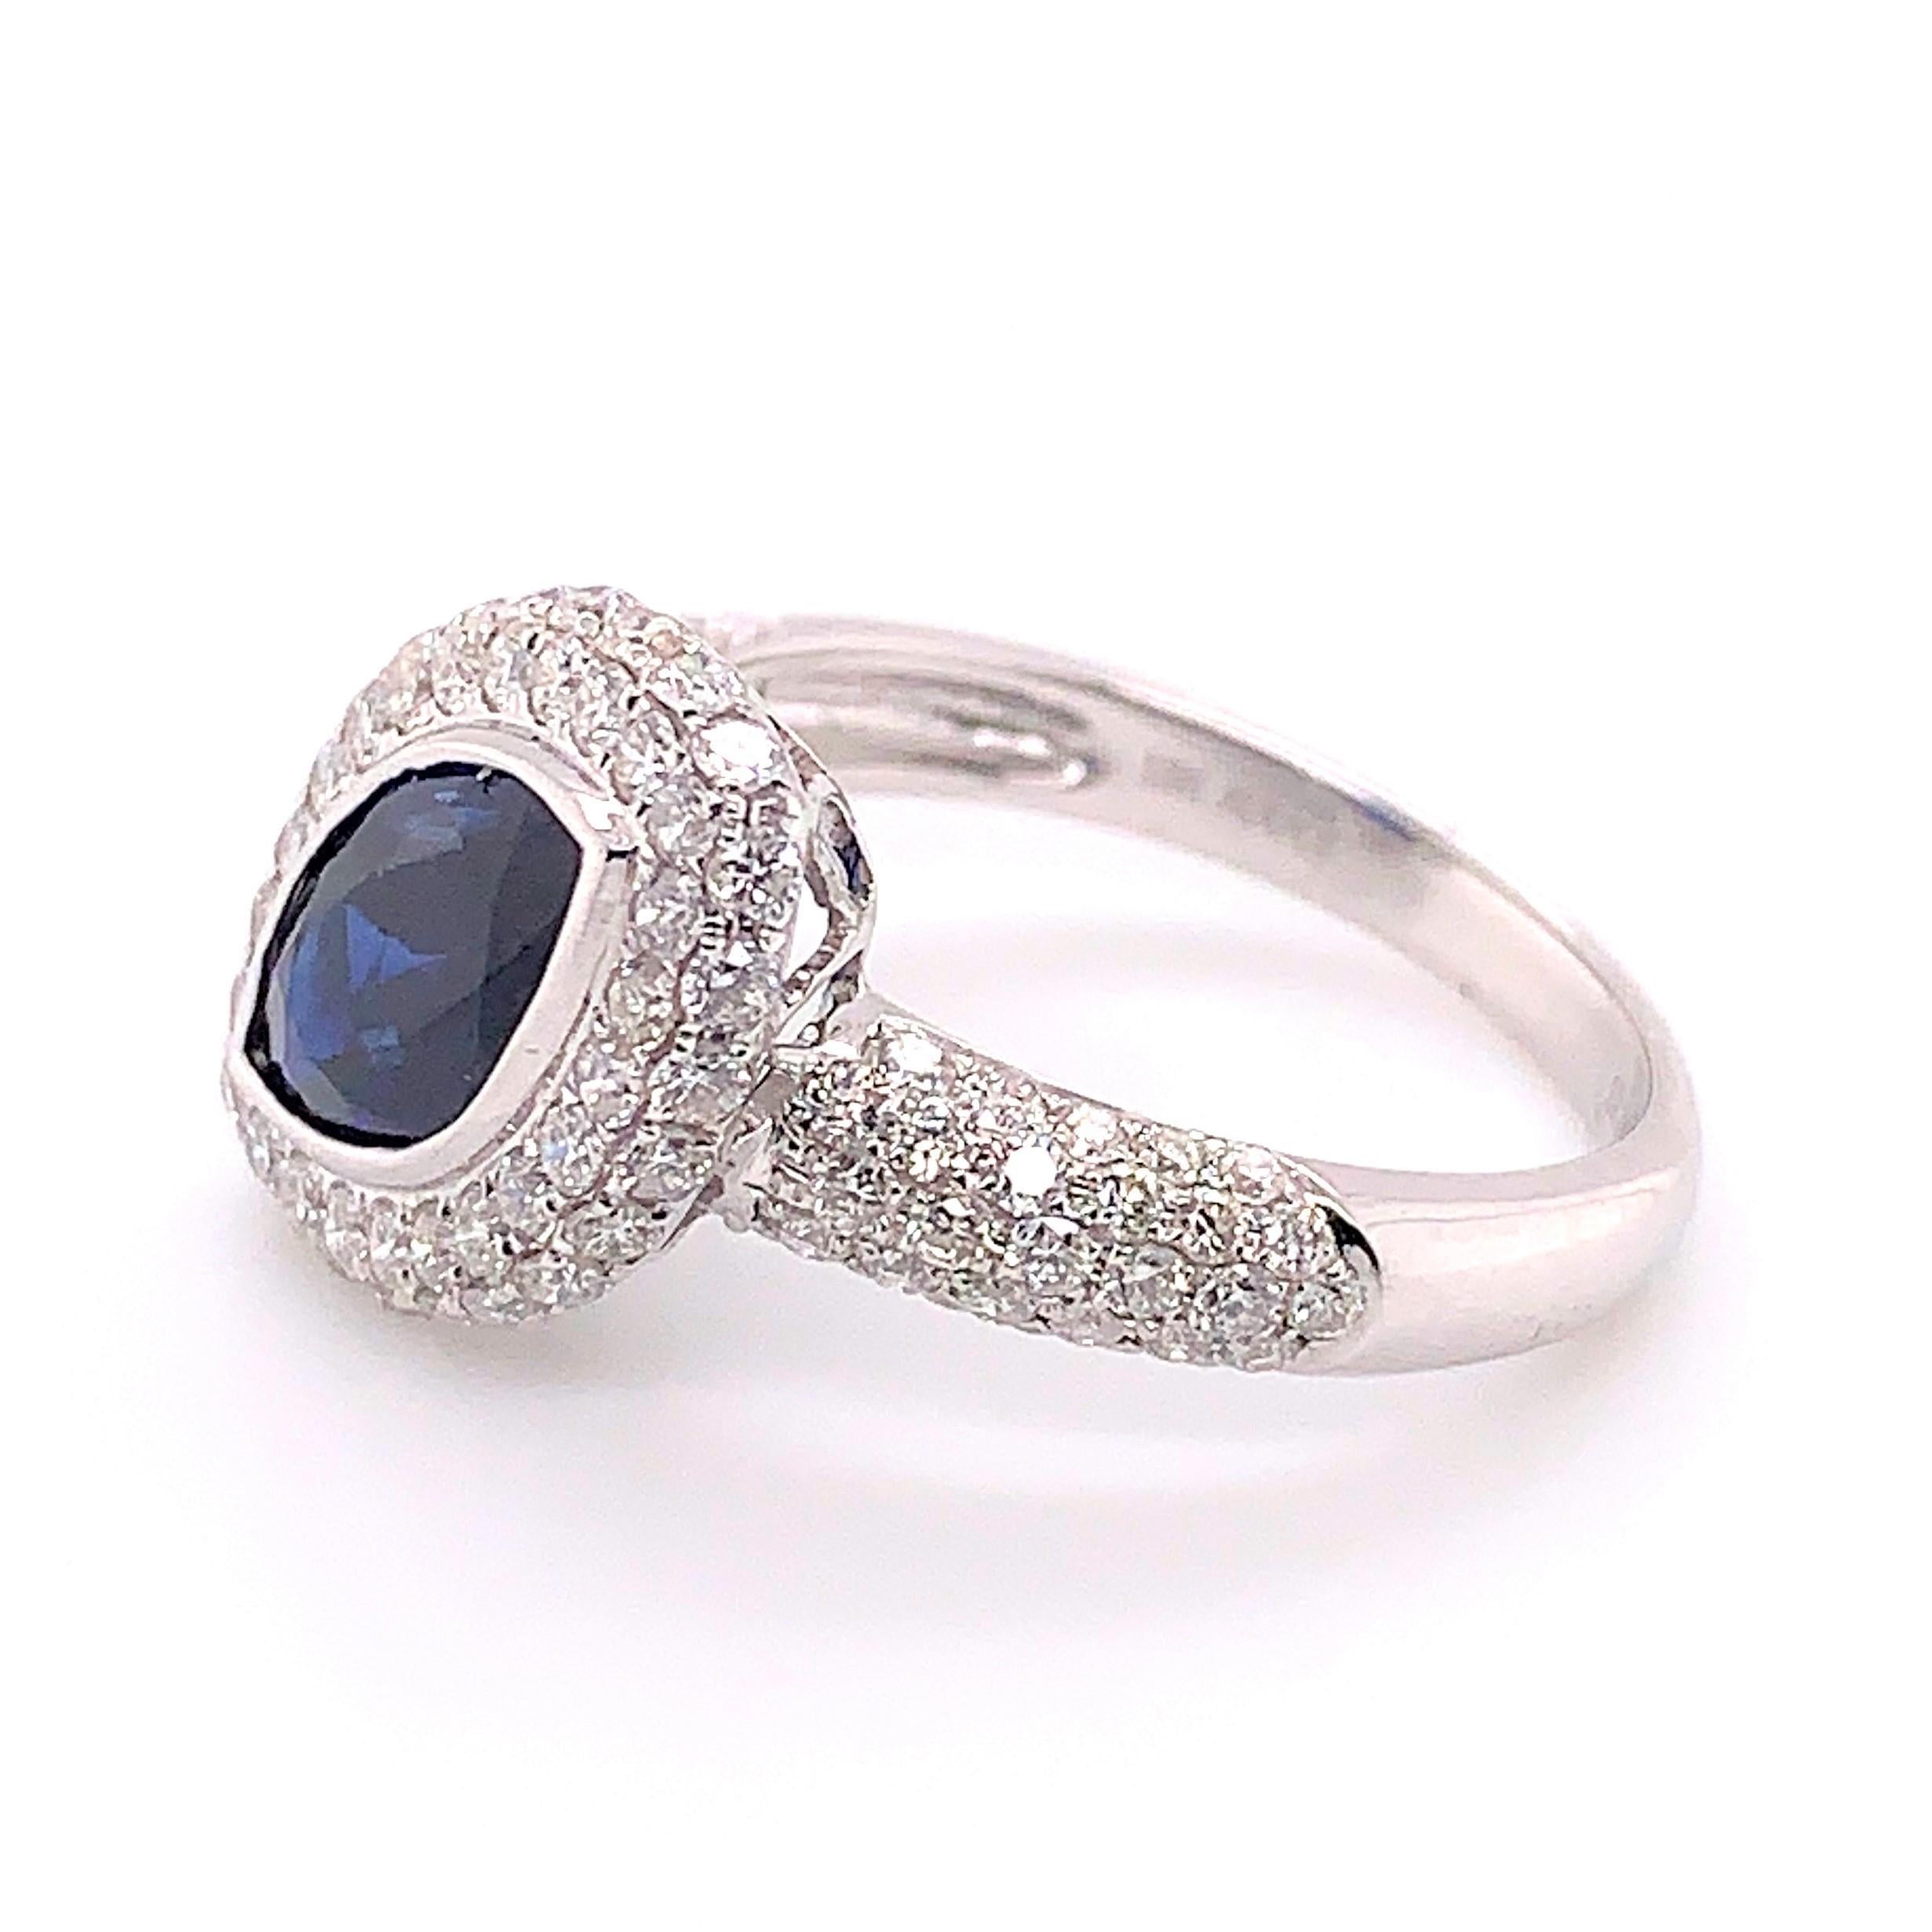 Contemporary 3.5 Carat Blue Sapphire Marquise Ring with White Diamonds